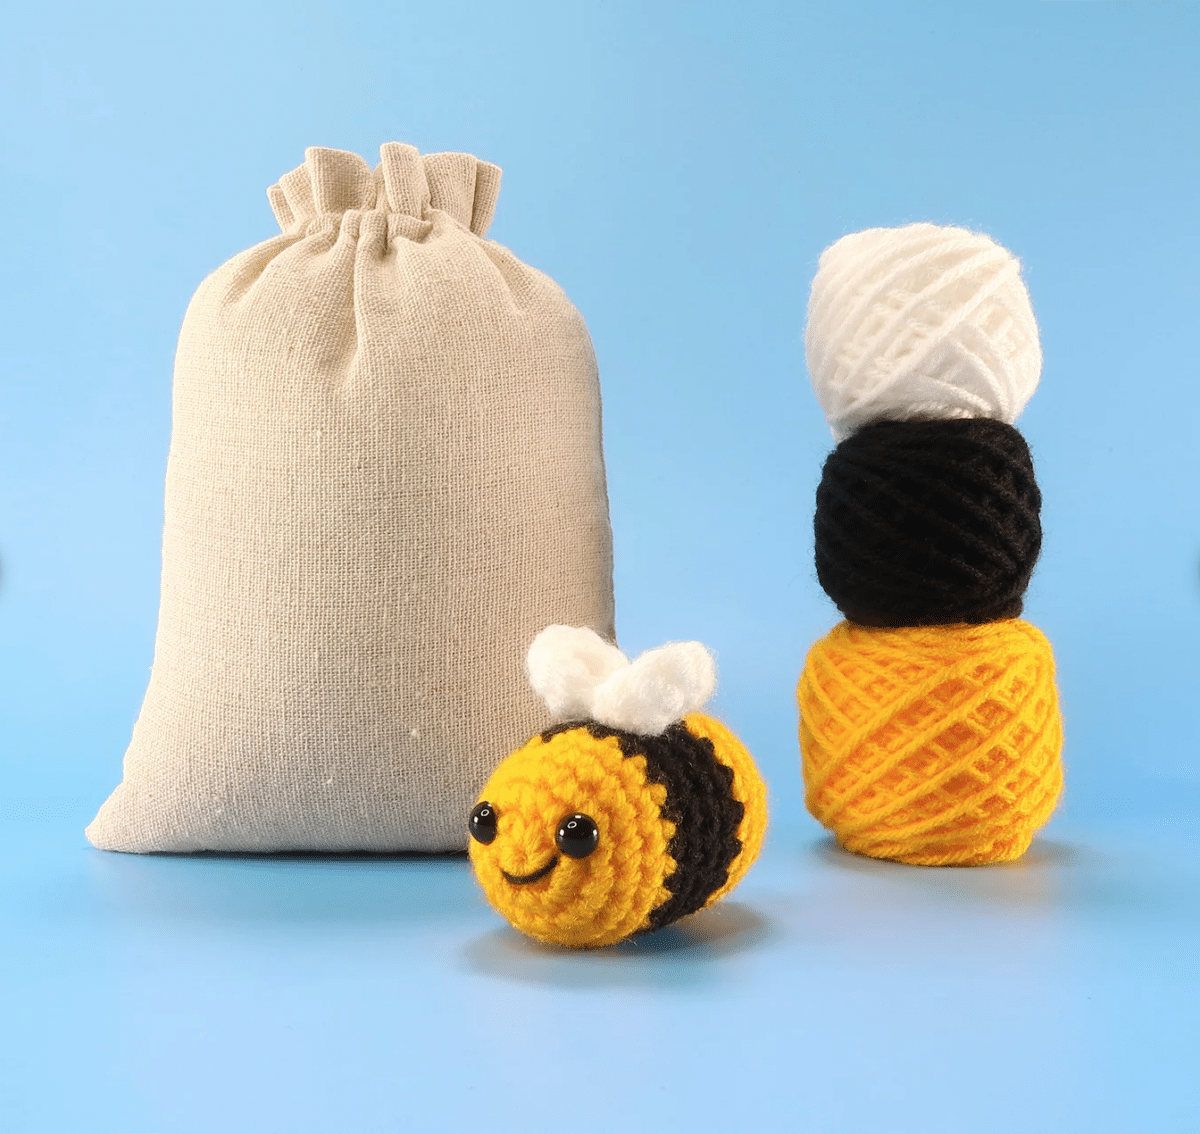 A beginner crochet kit that includes a crocheted bee and a bag of yarn.